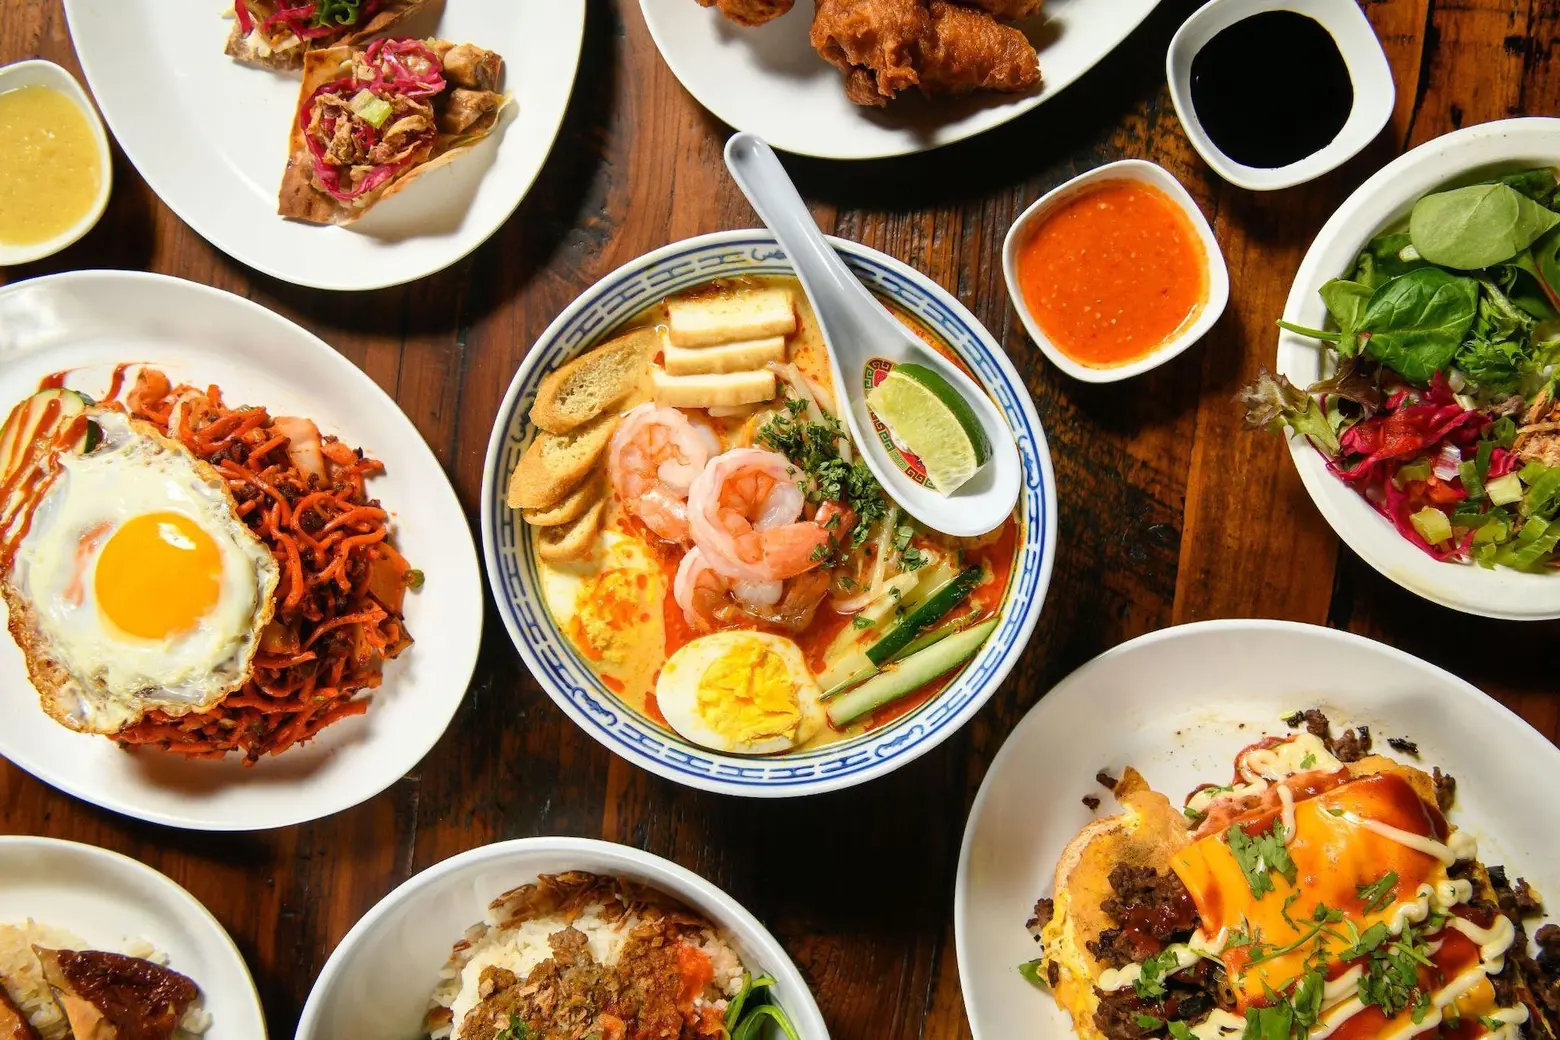 New York’s first Singapore-style hawker center opens in Midtown next week